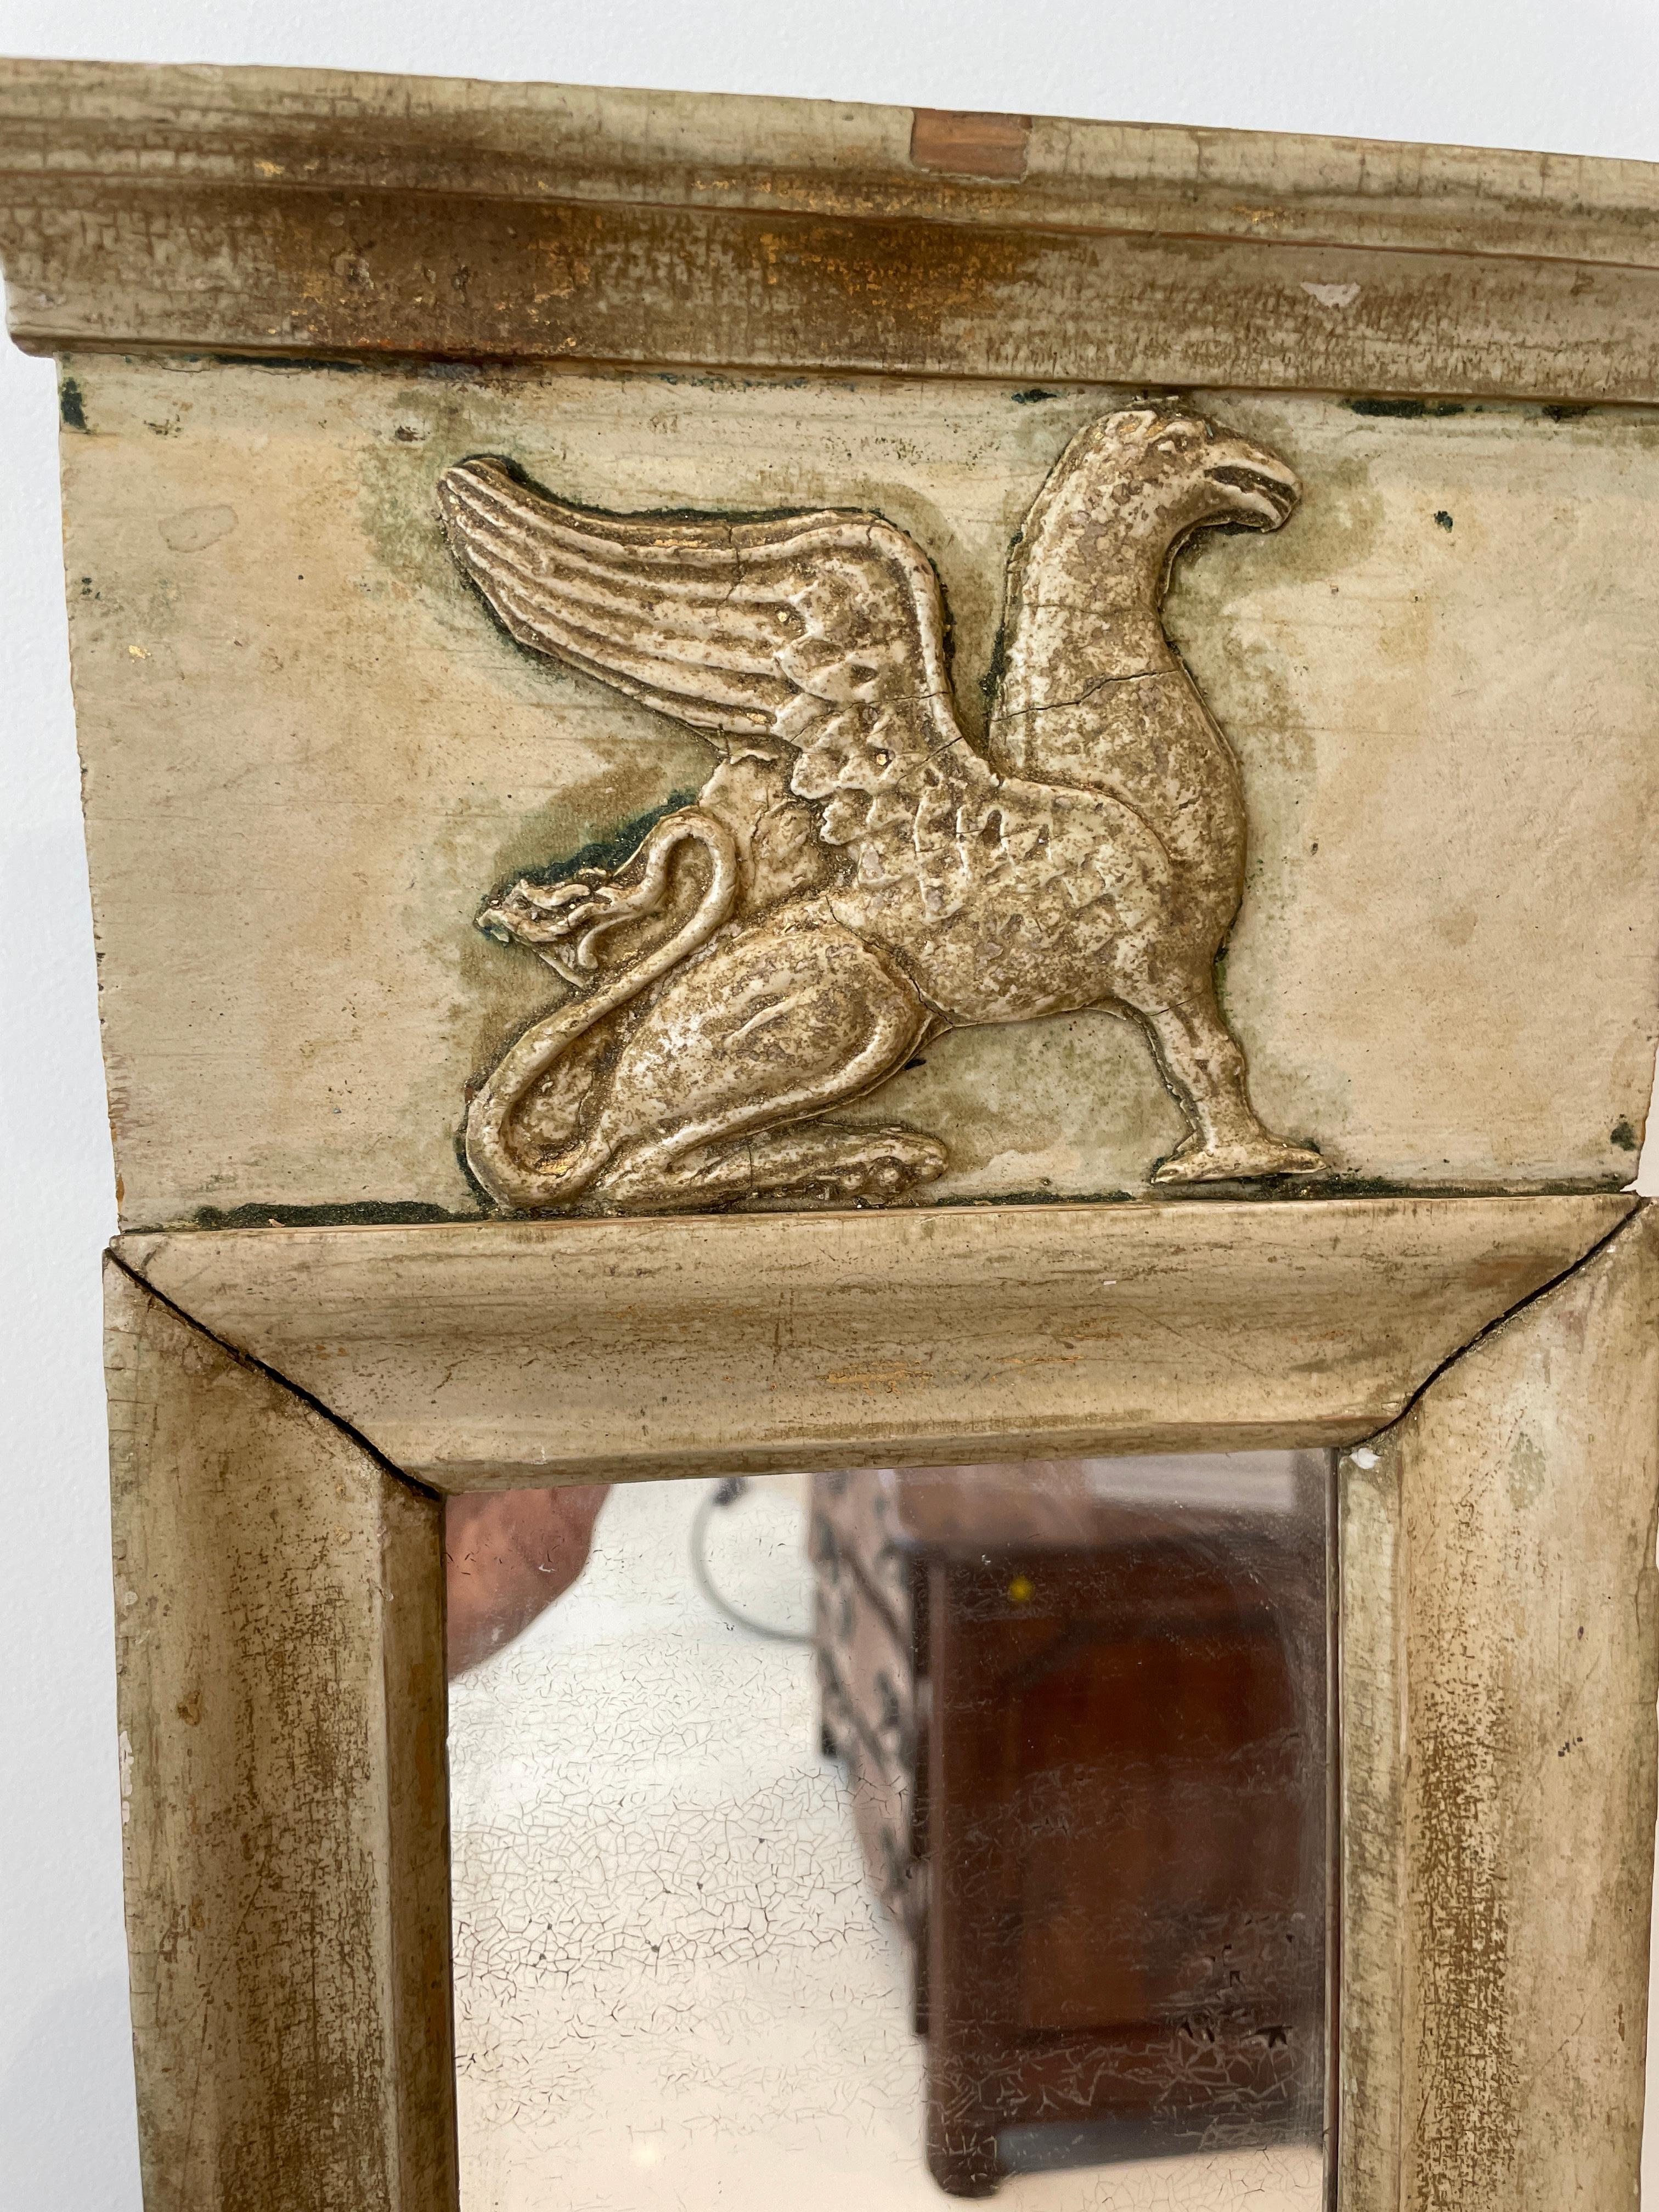 Diminutive in size, but with great presence. This mirror would be perfect in a small powder room or in a grouping. Or, as we have used it, over a small table with a small lamp. The top third shows the full profile of an alert Griffon with curled